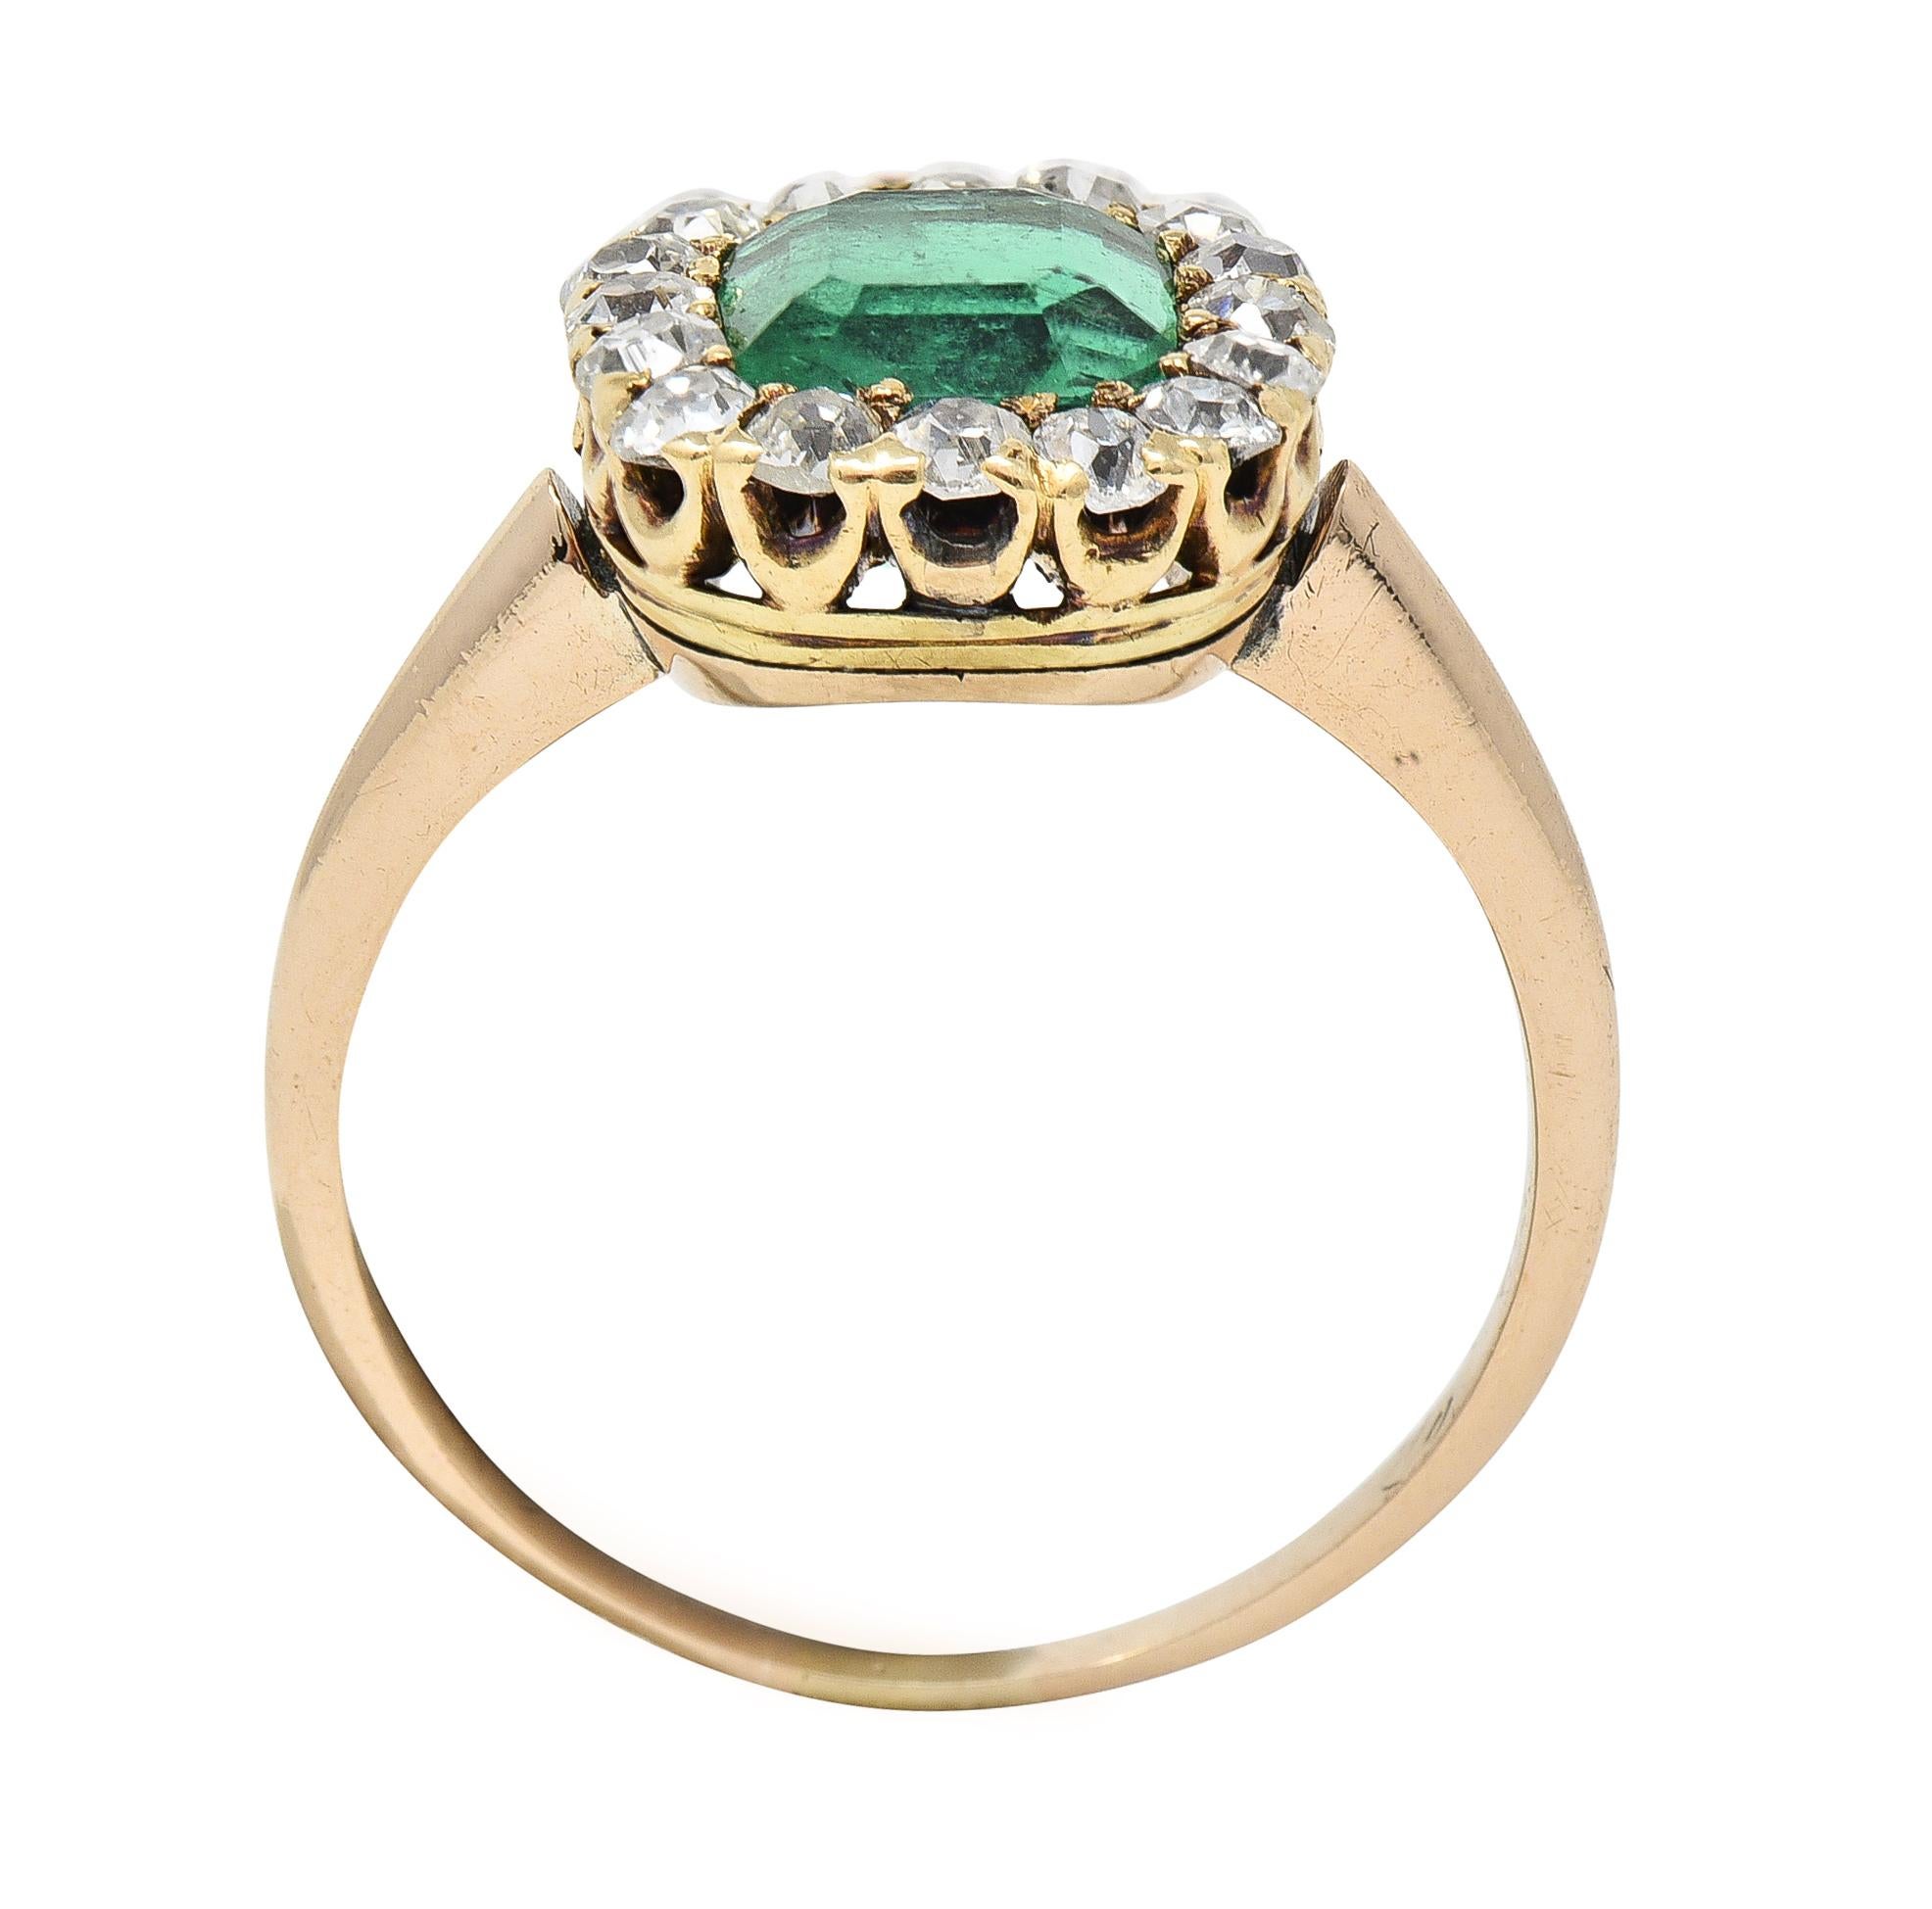 Victorian 2.51 CTW Colombian Emerald Diamond 14 Karat Yellow Gold Halo Ring GIA For Sale 4